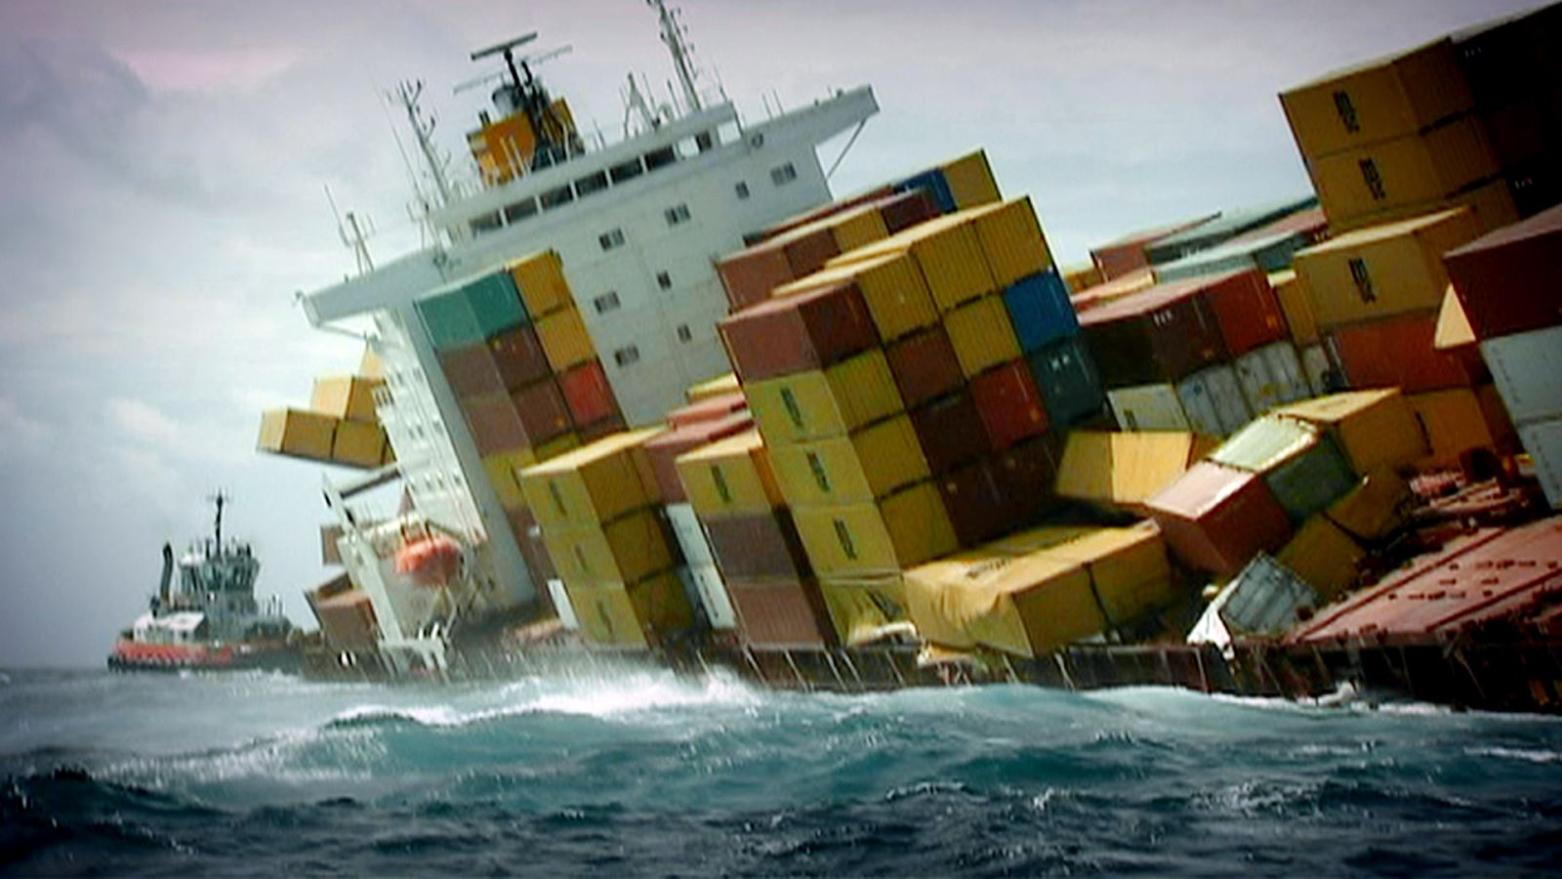 What Are The Most Common Causes Of Cargo Loss?